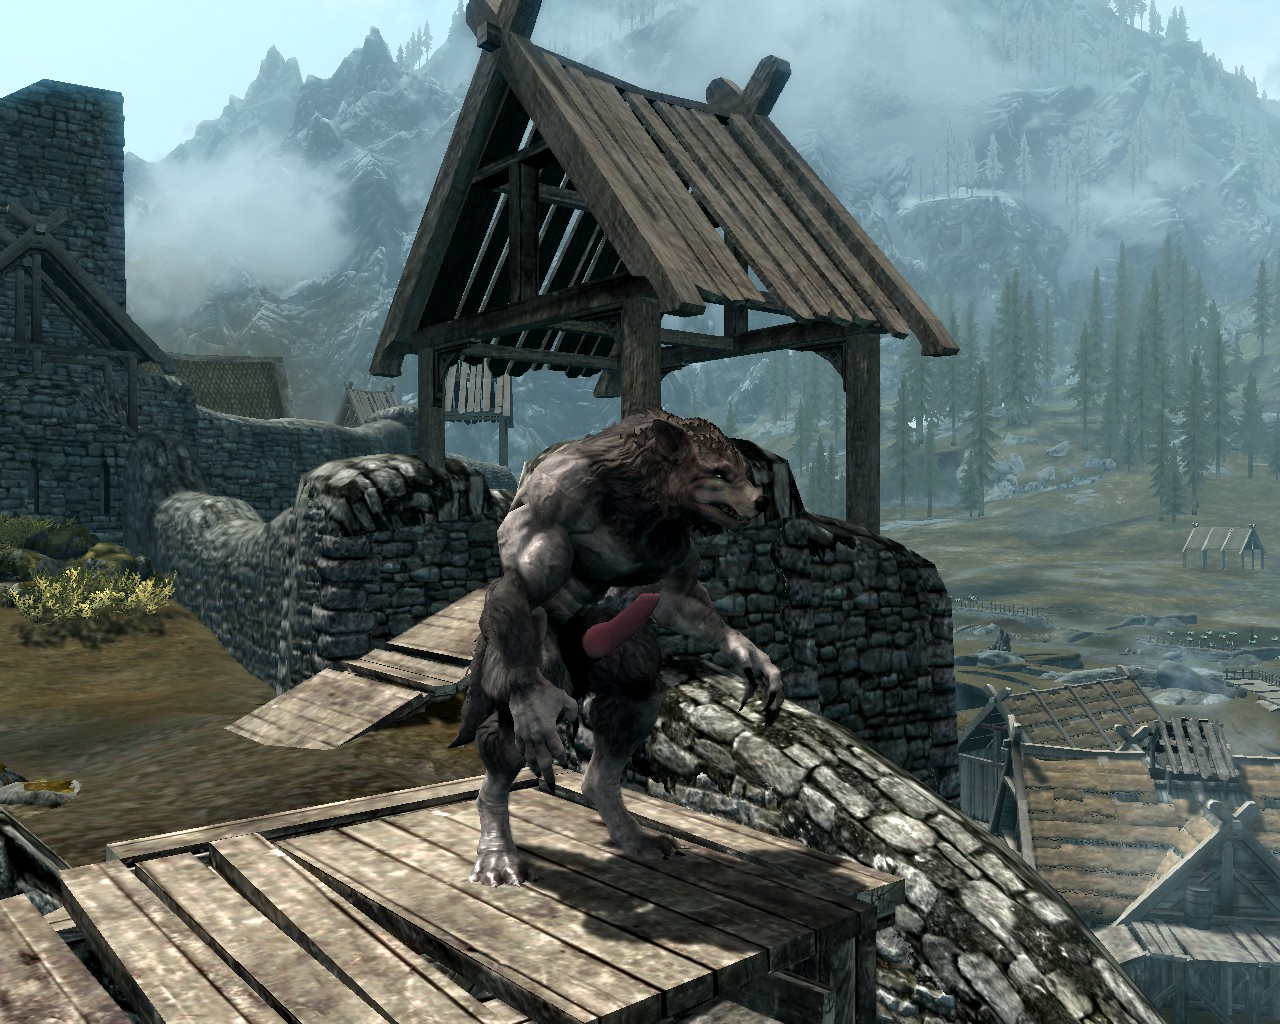 Bulky Adult Werewolves Downloads Skyrim Adult And Sex